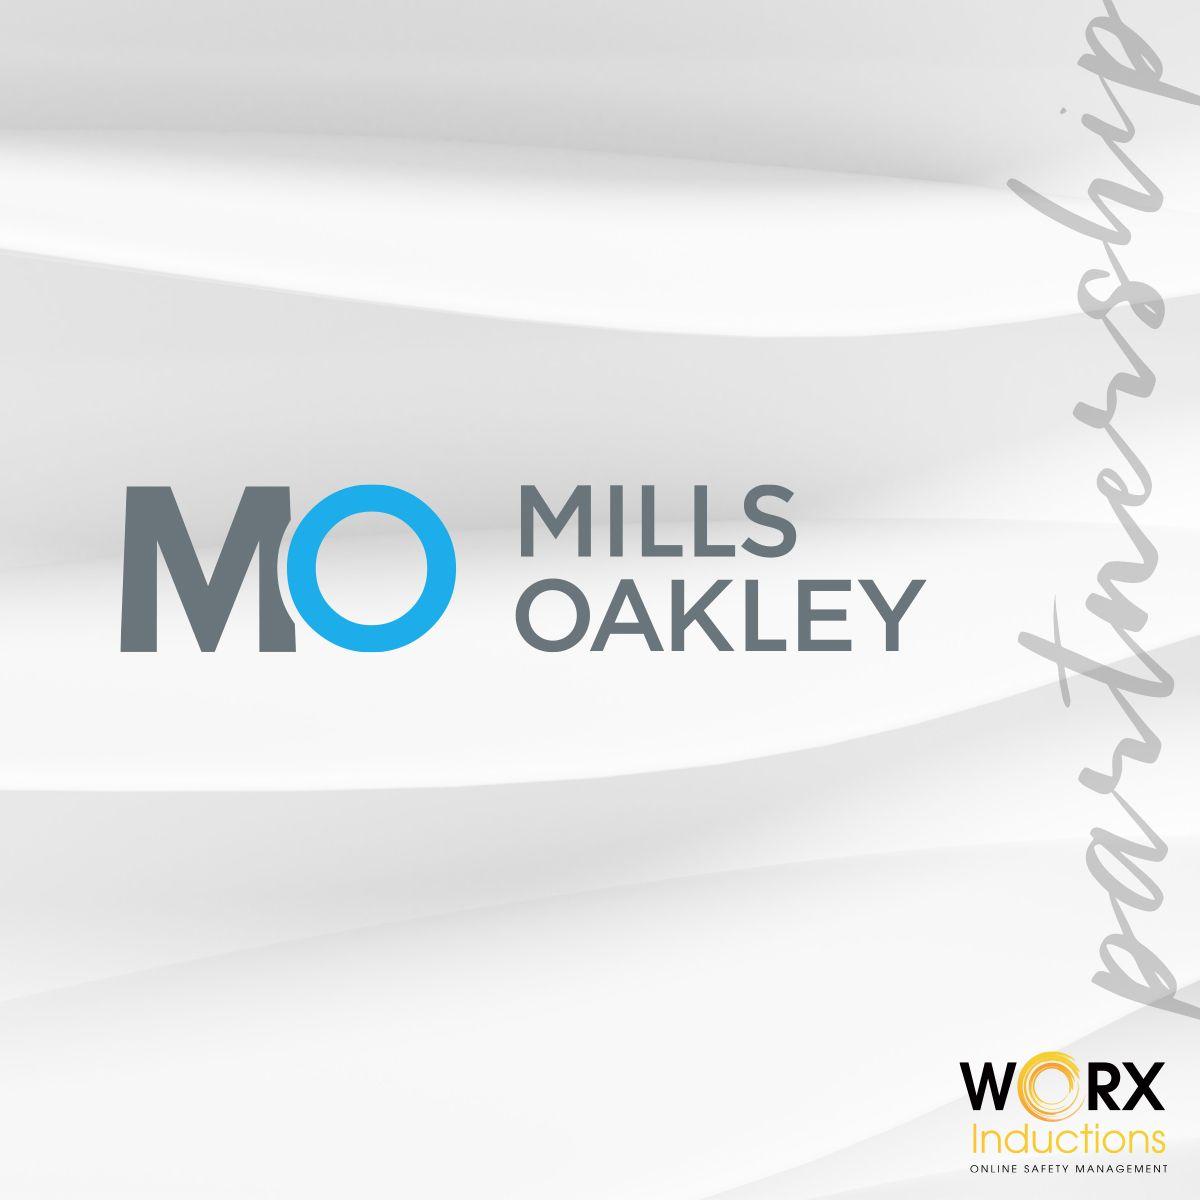 Worx and Mills Oakley Working Together